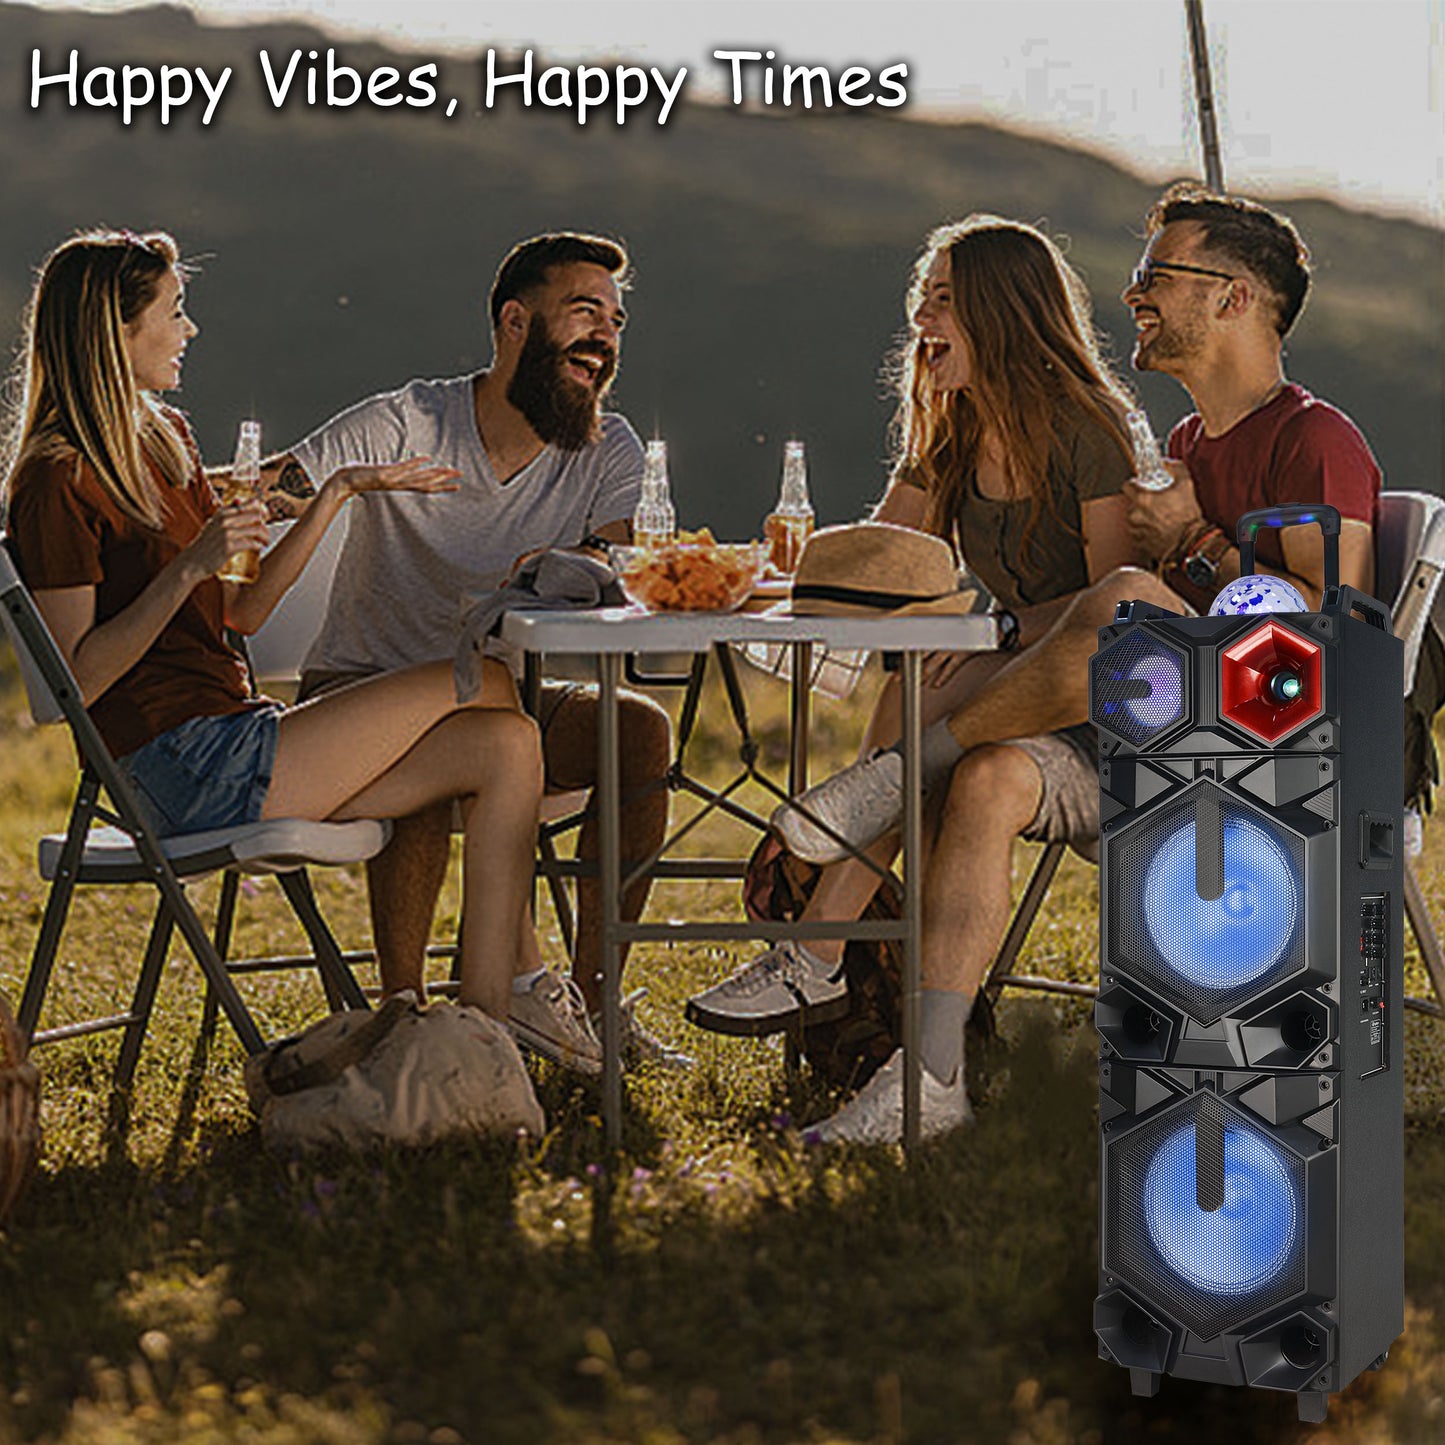 TOPTECH GALAXY-210 Dual 10''Woofer Portable Bluetooth Speaker with Disco Light,of Blazing Powerful Sound,Precision-Tuned Bluetooth Stereo Sound, 10 Meters Wireless Range,for Home/Outdoor,Gift